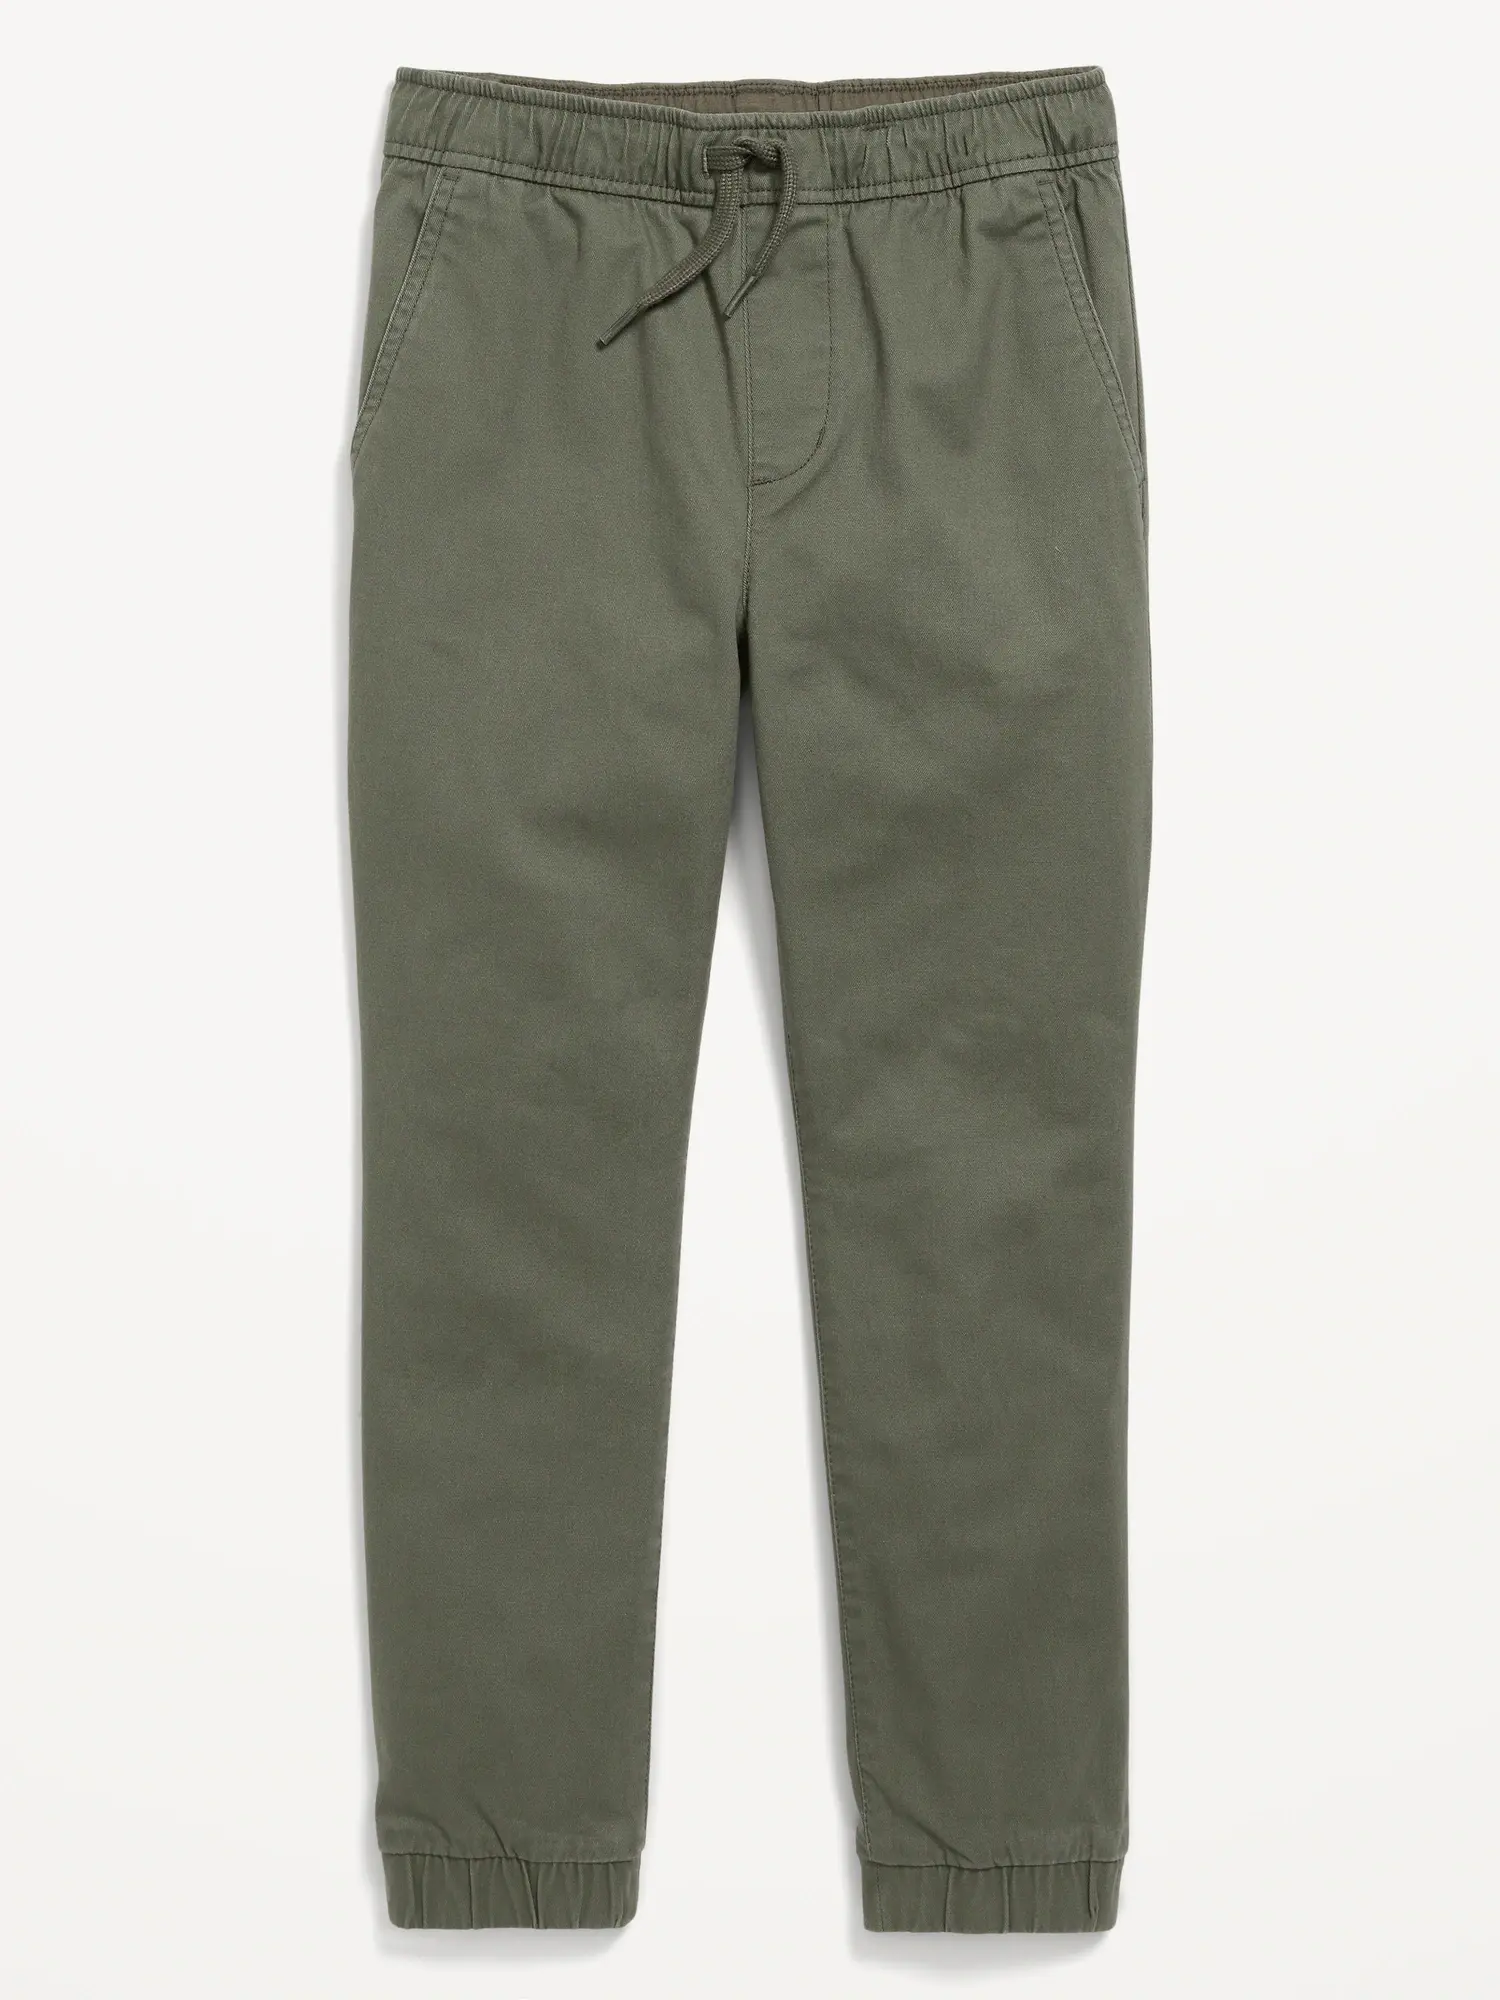 Old Navy Built-In Flex Twill Jogger Pants for Boys green. 1